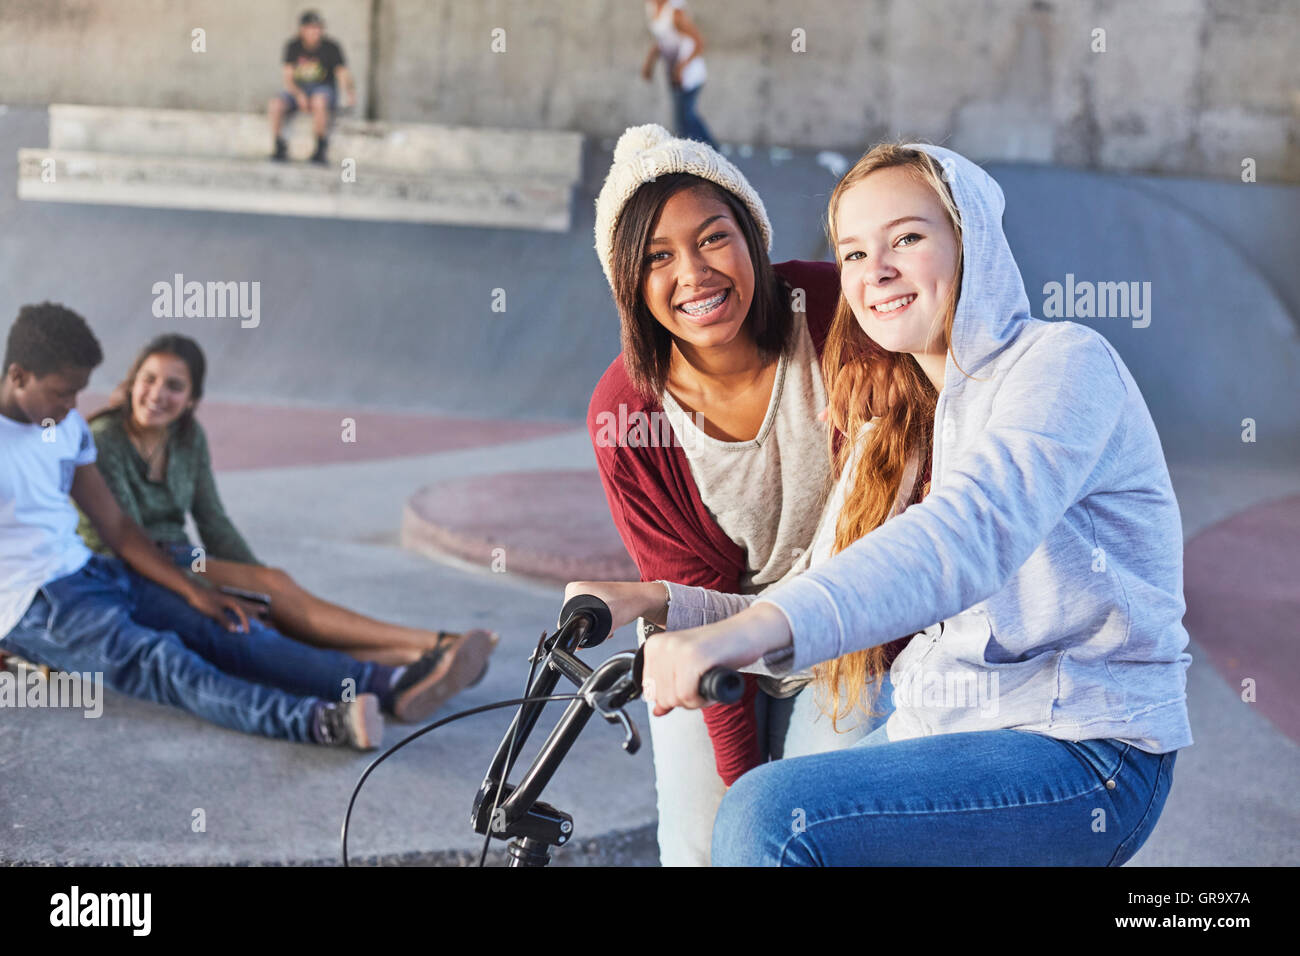 Portrait smiling teenage girls with BMX bicycle at skate park Stock Photo